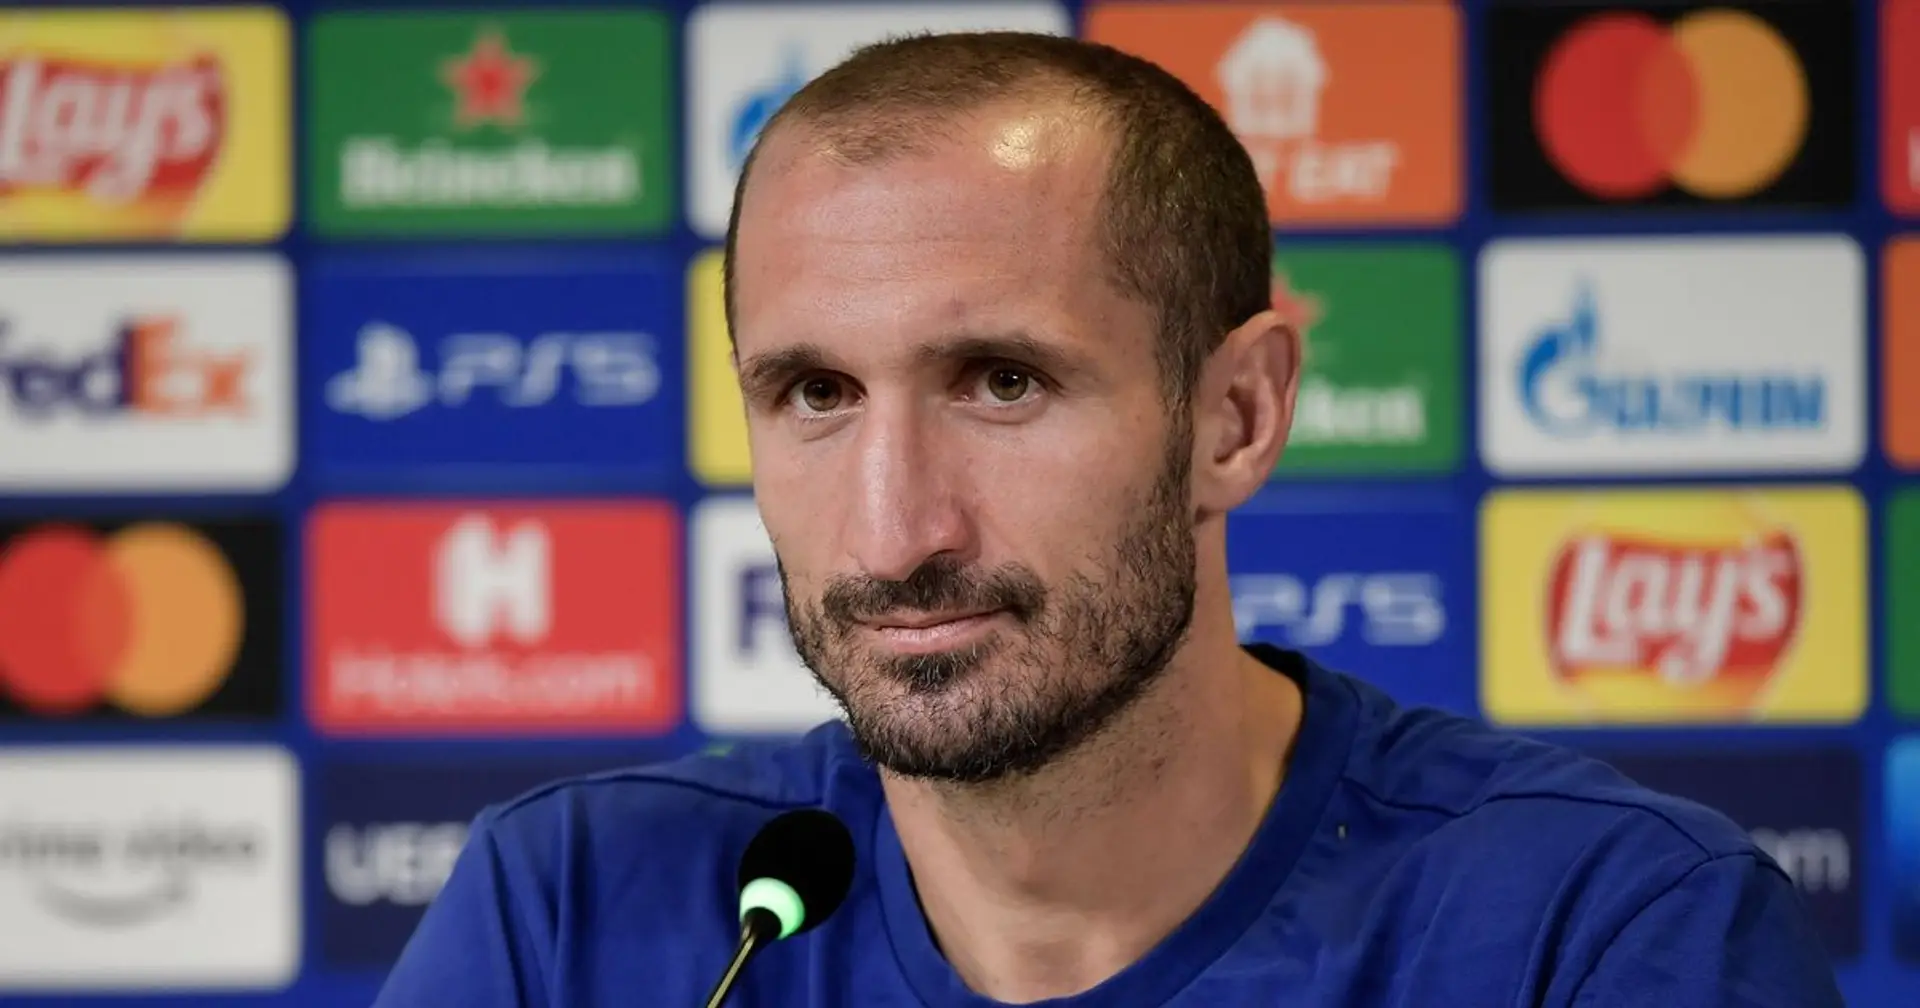 Chiellini: 'I may not be the target of discriminatory abuse but this fight against discrimination is also my struggle'